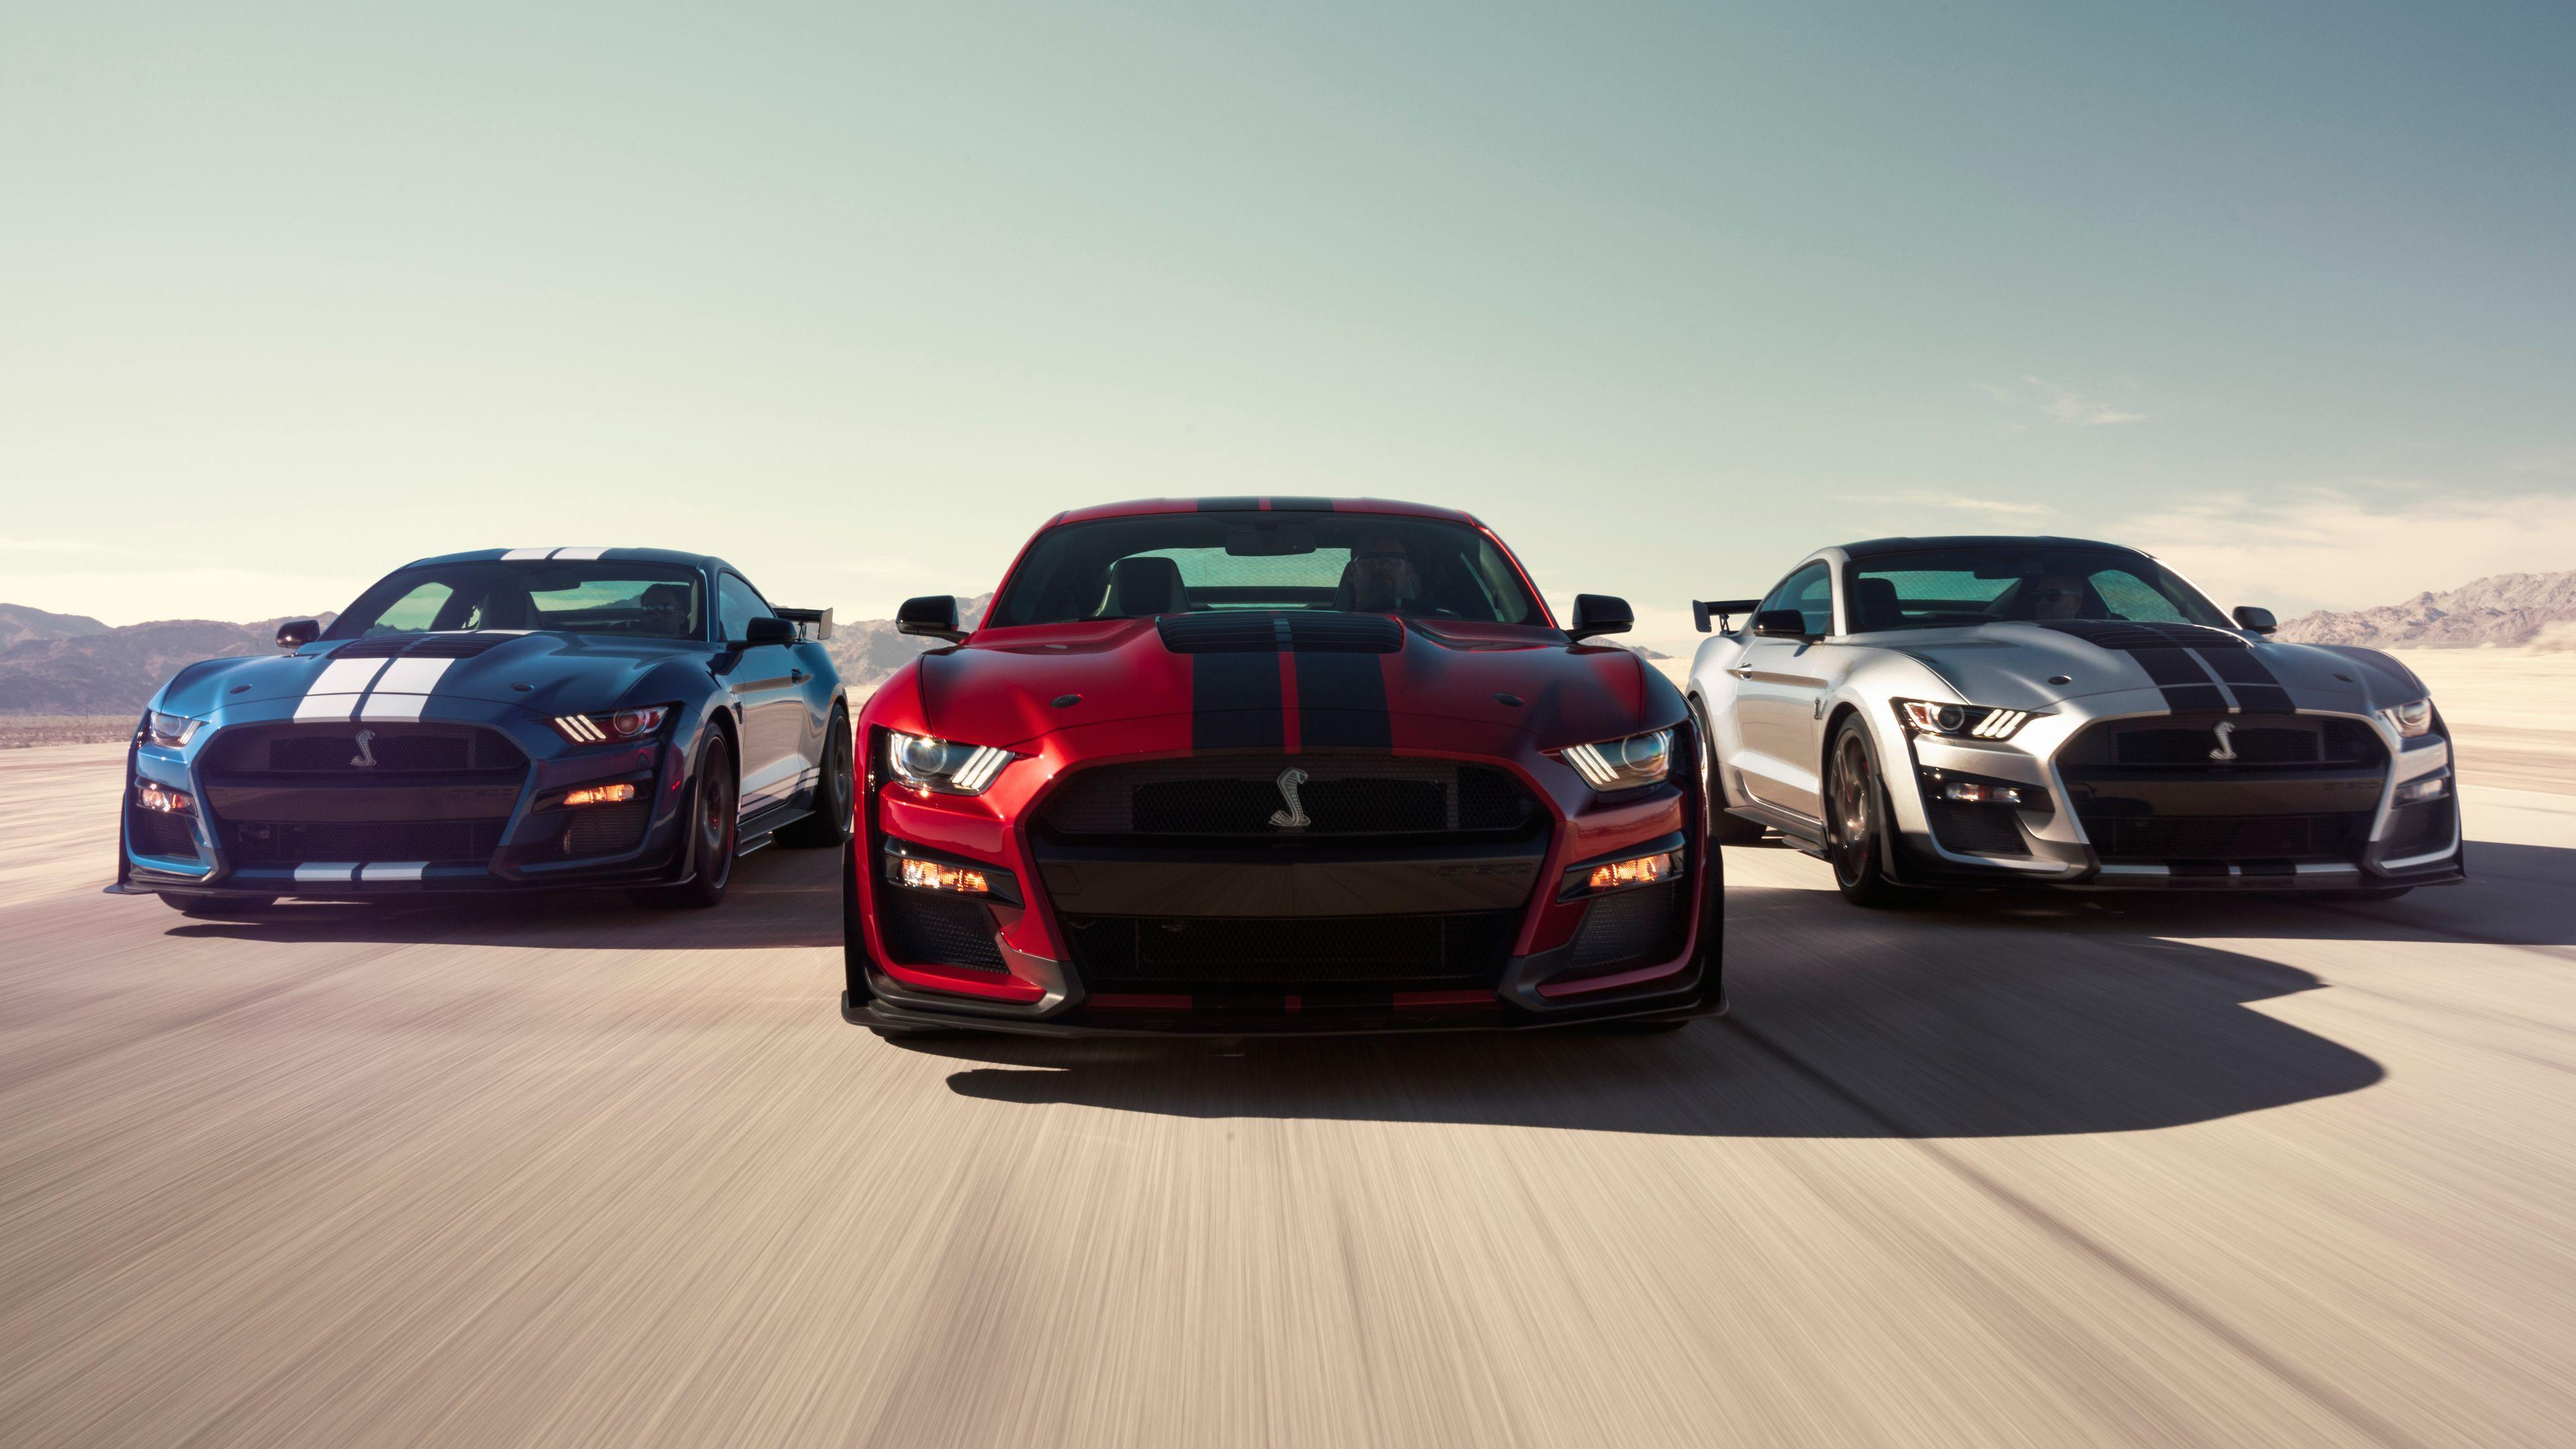 2020 Ford Mustang Shelby GT500 4k shelby wallpapers, hd